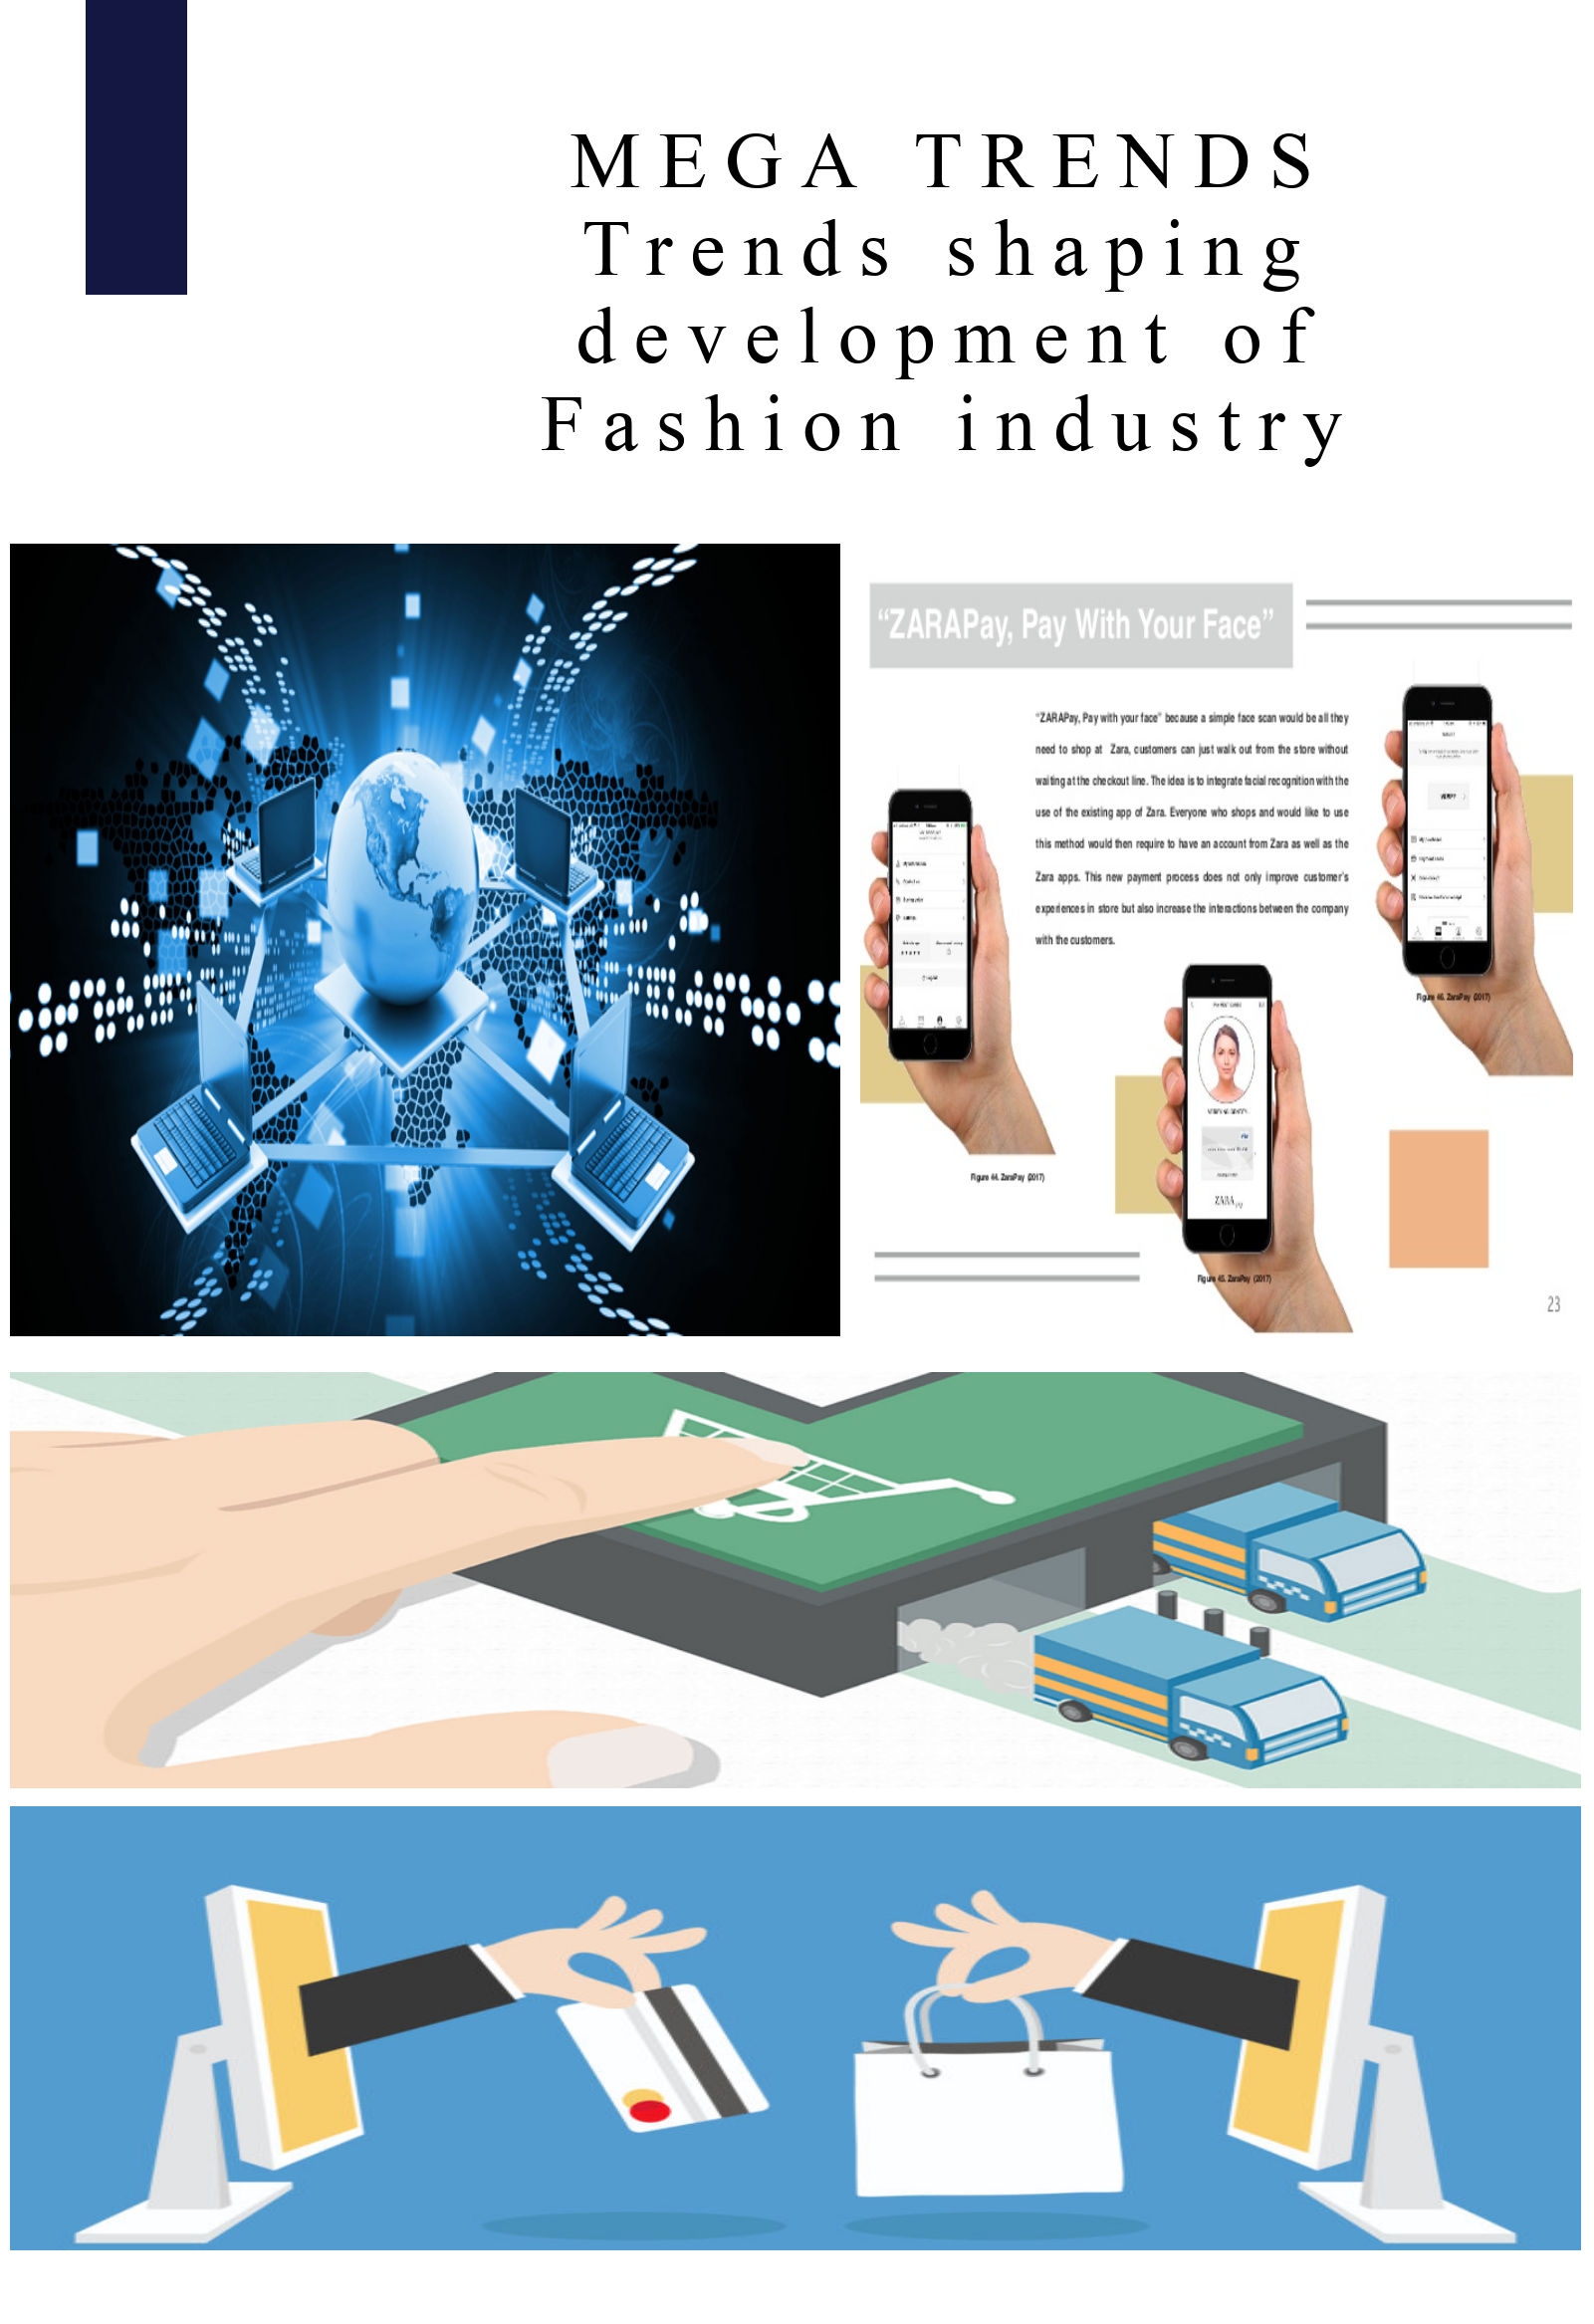 Mega Trends shaping development of fashion industry